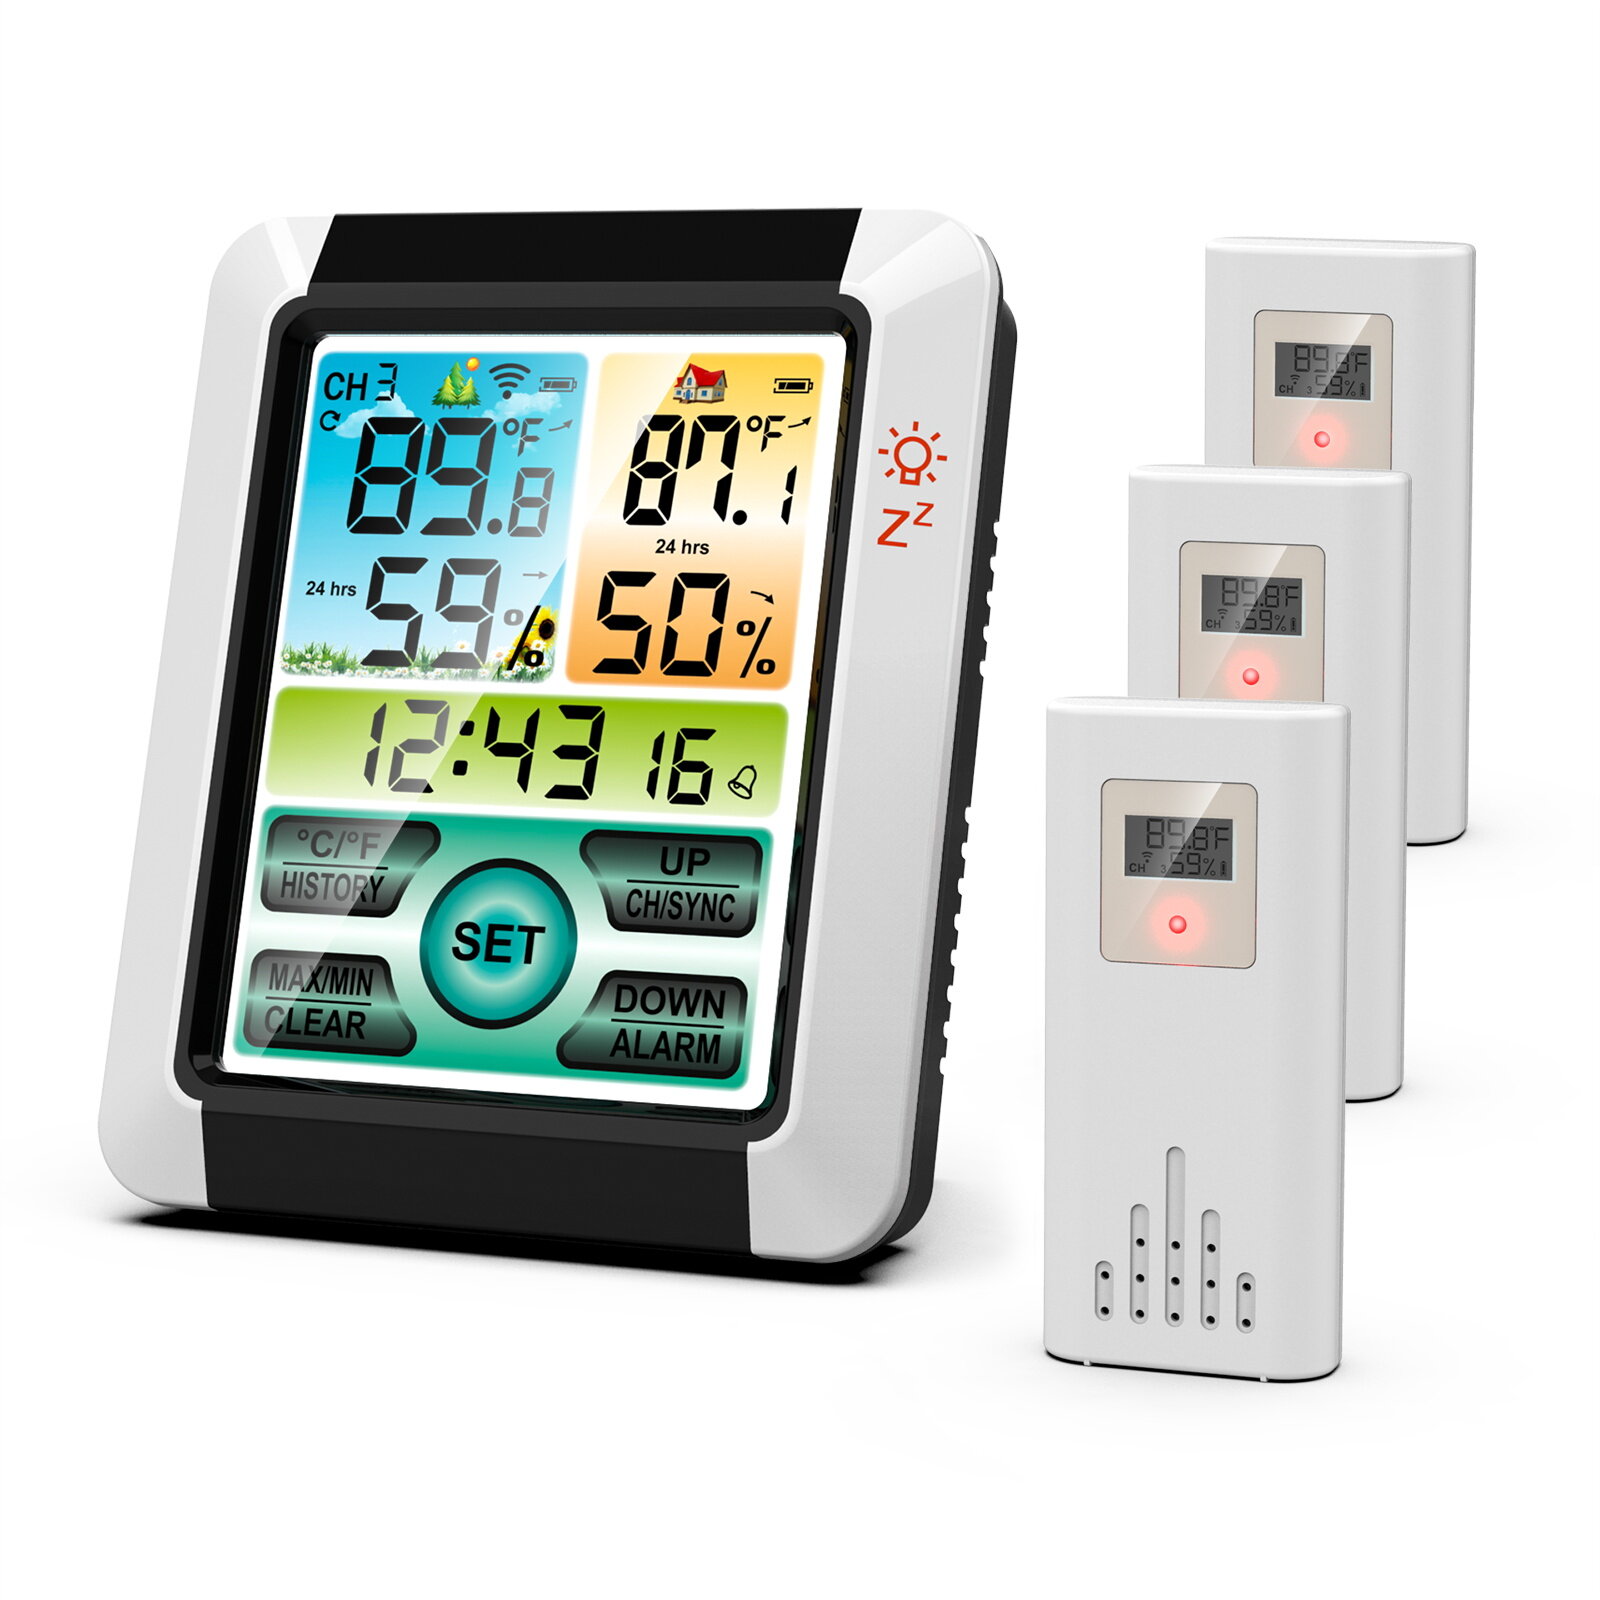 AGSIVO Weather Station Alarm Clock Wireless Indoor Outdoor Thermometer Sensor Digital Humidity Monitor with Atomic Clock